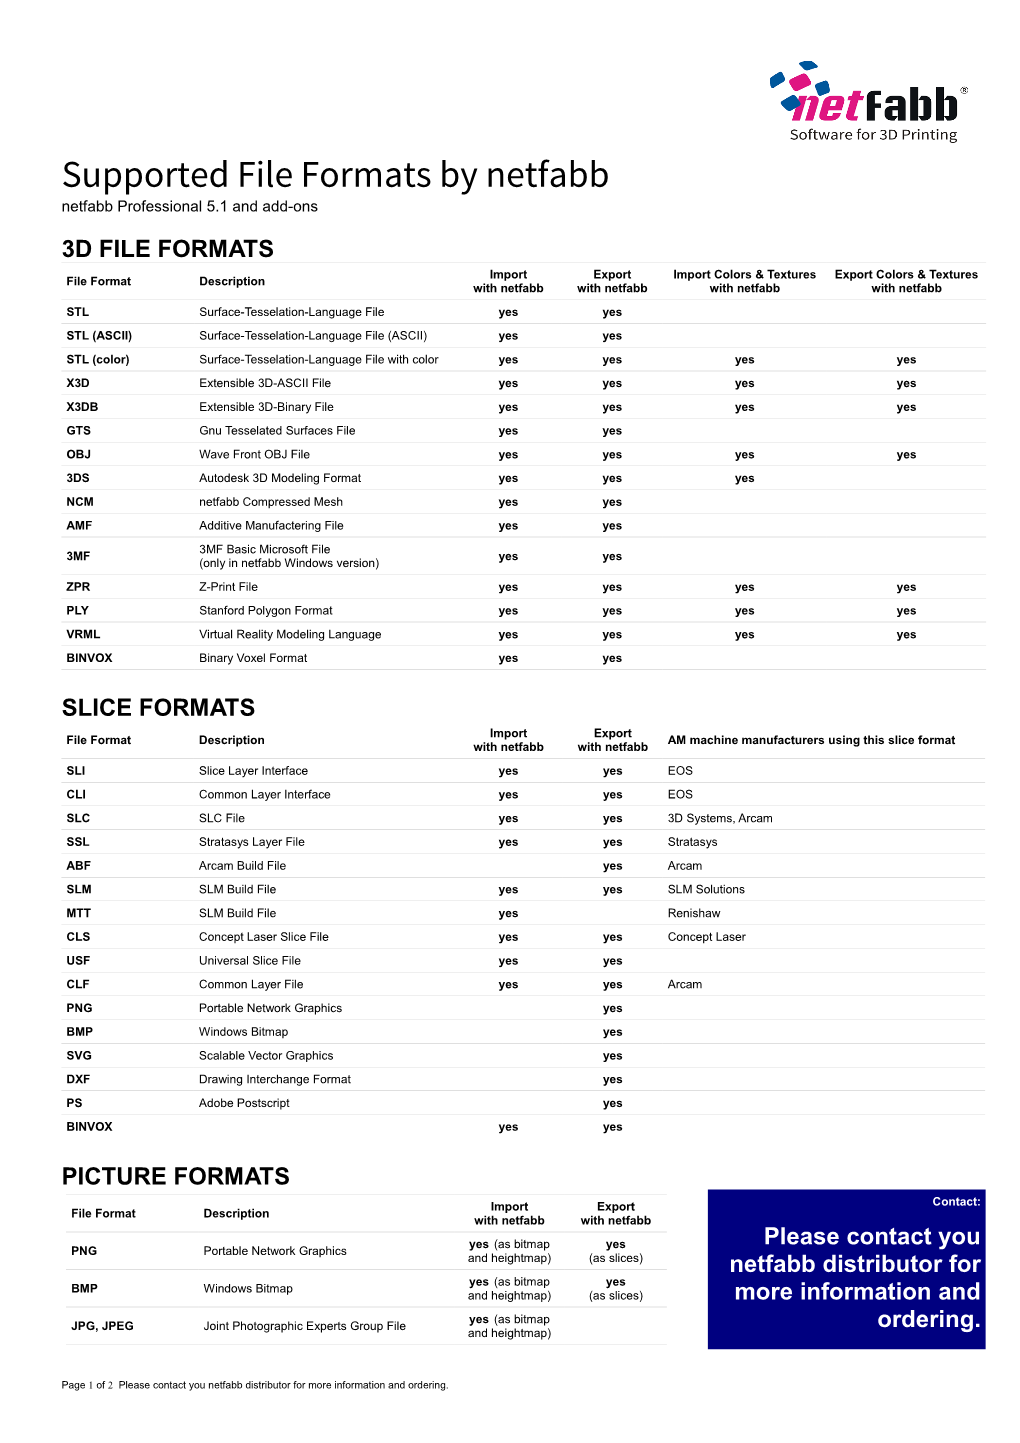 Supported File Formats by Netfabb